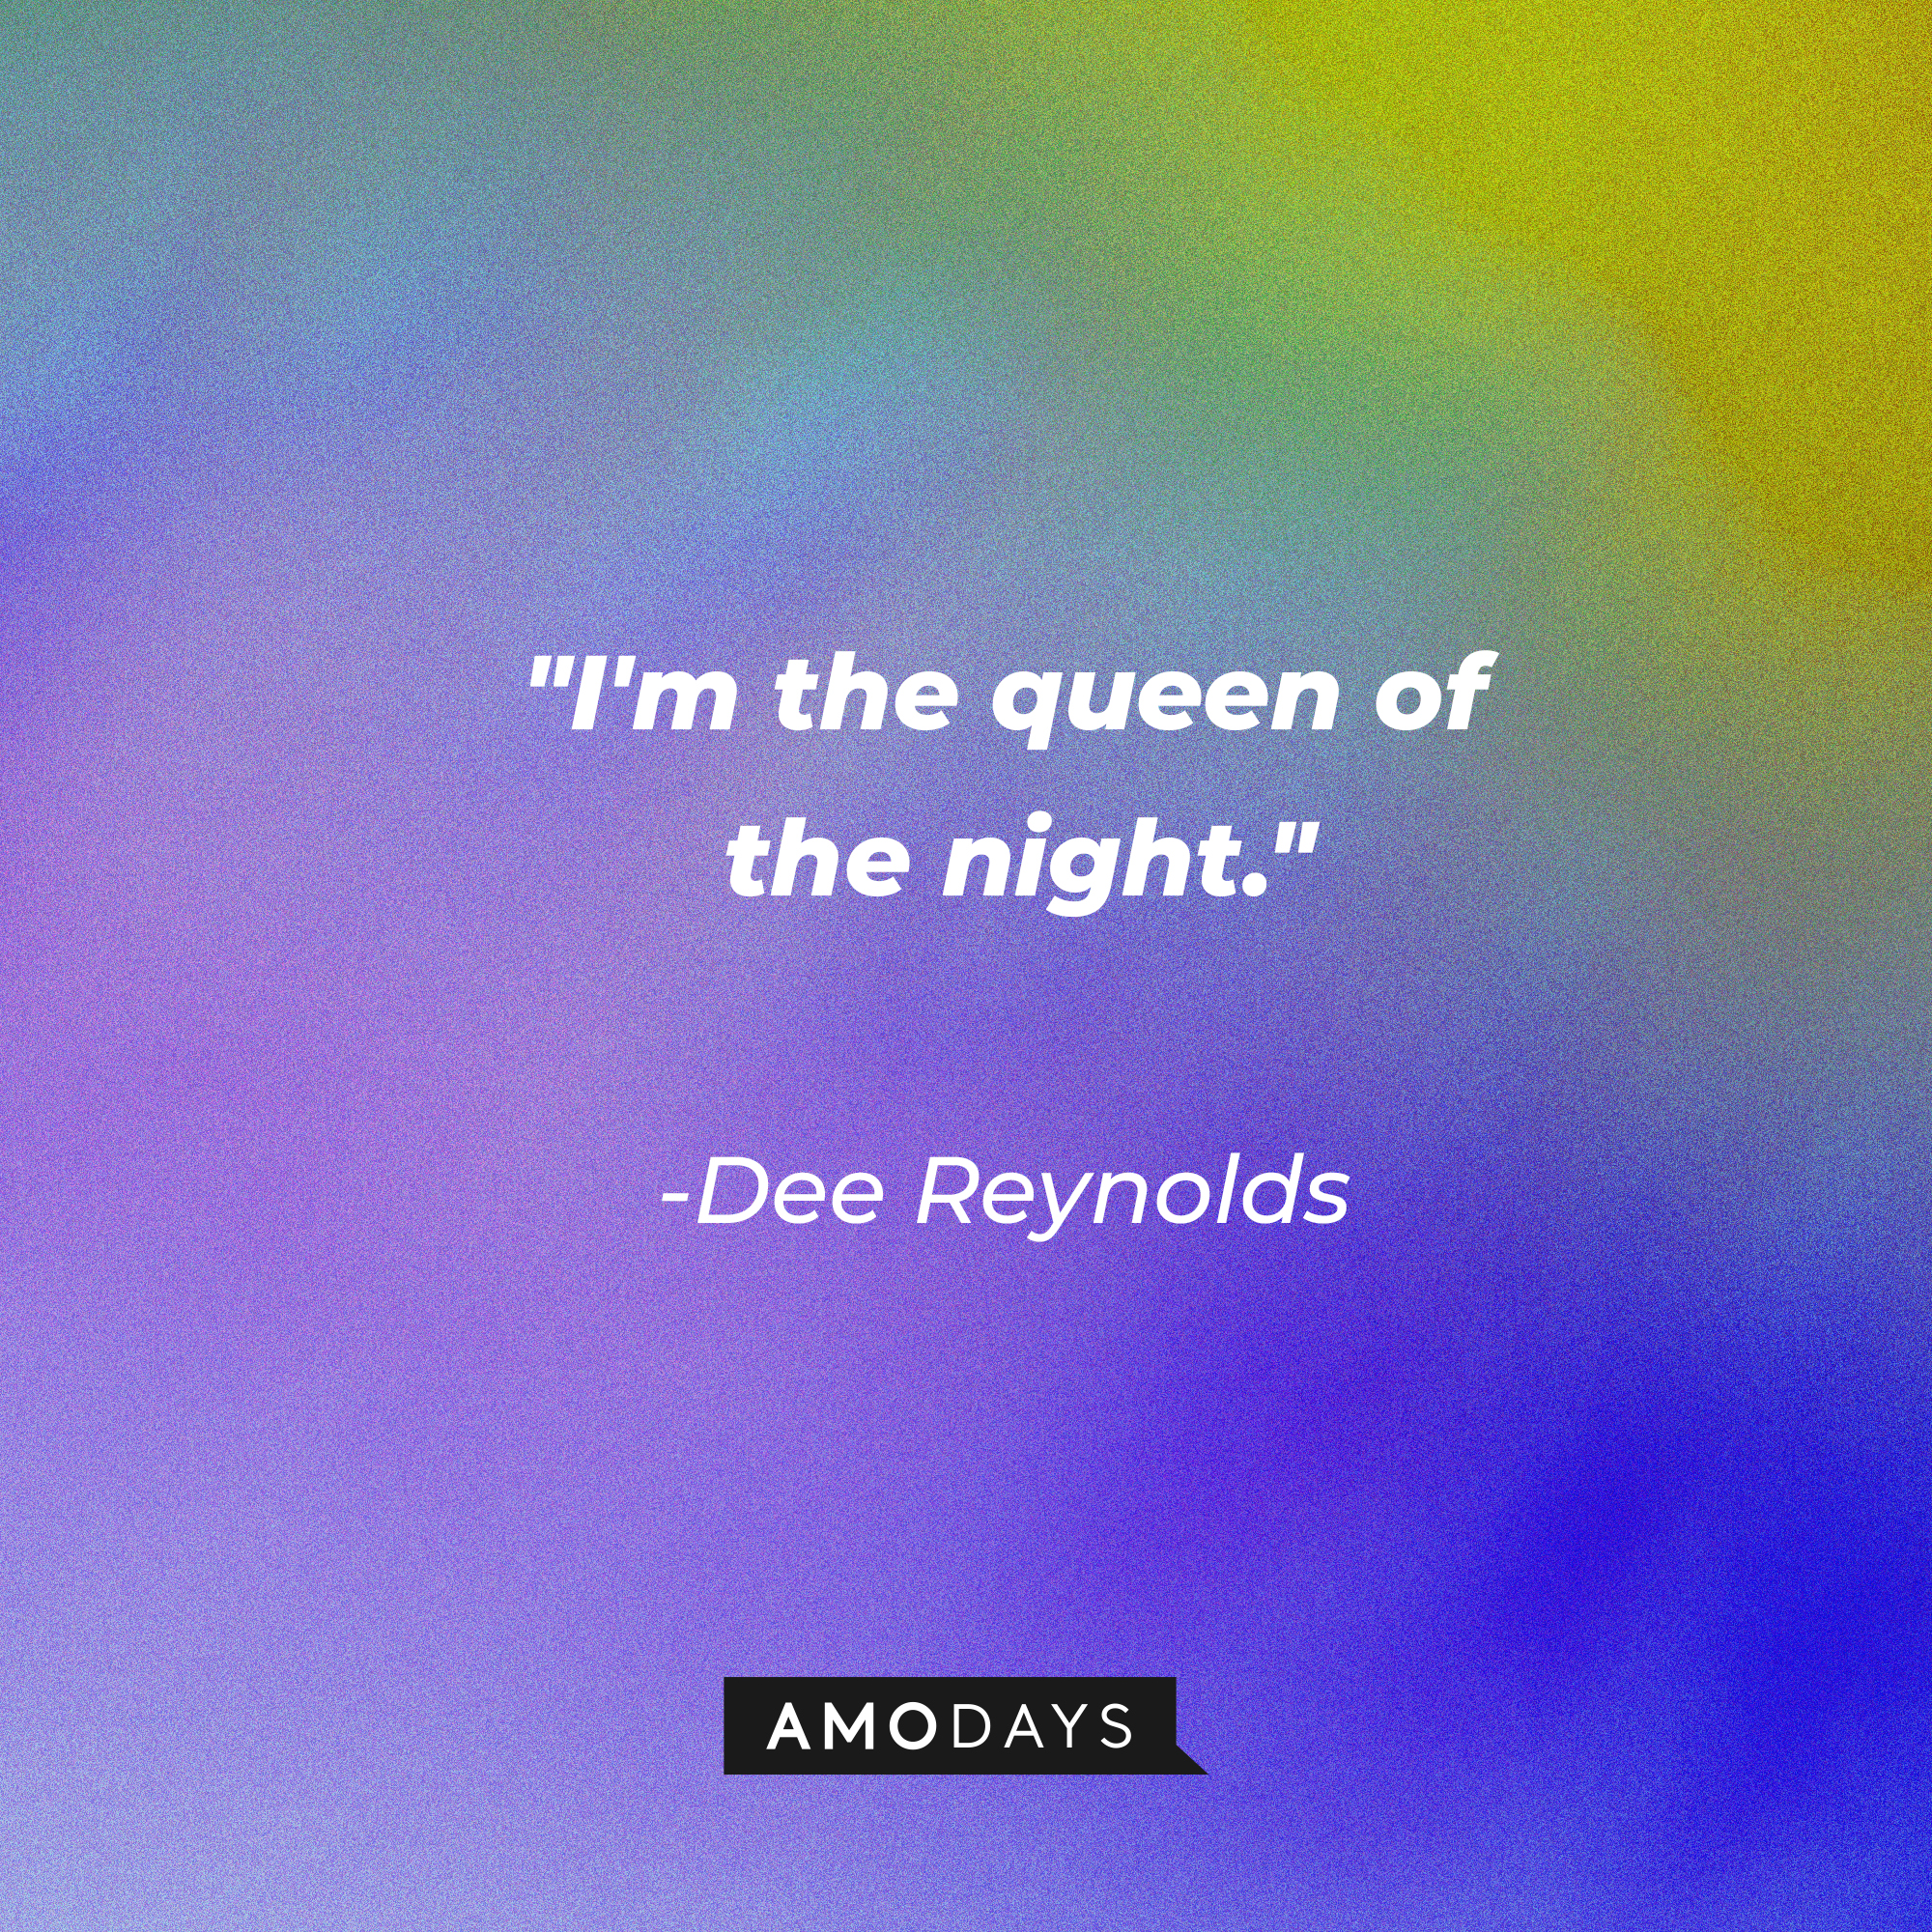 A photo with the quote, "I'm the queen of the night" | Source: Amodays